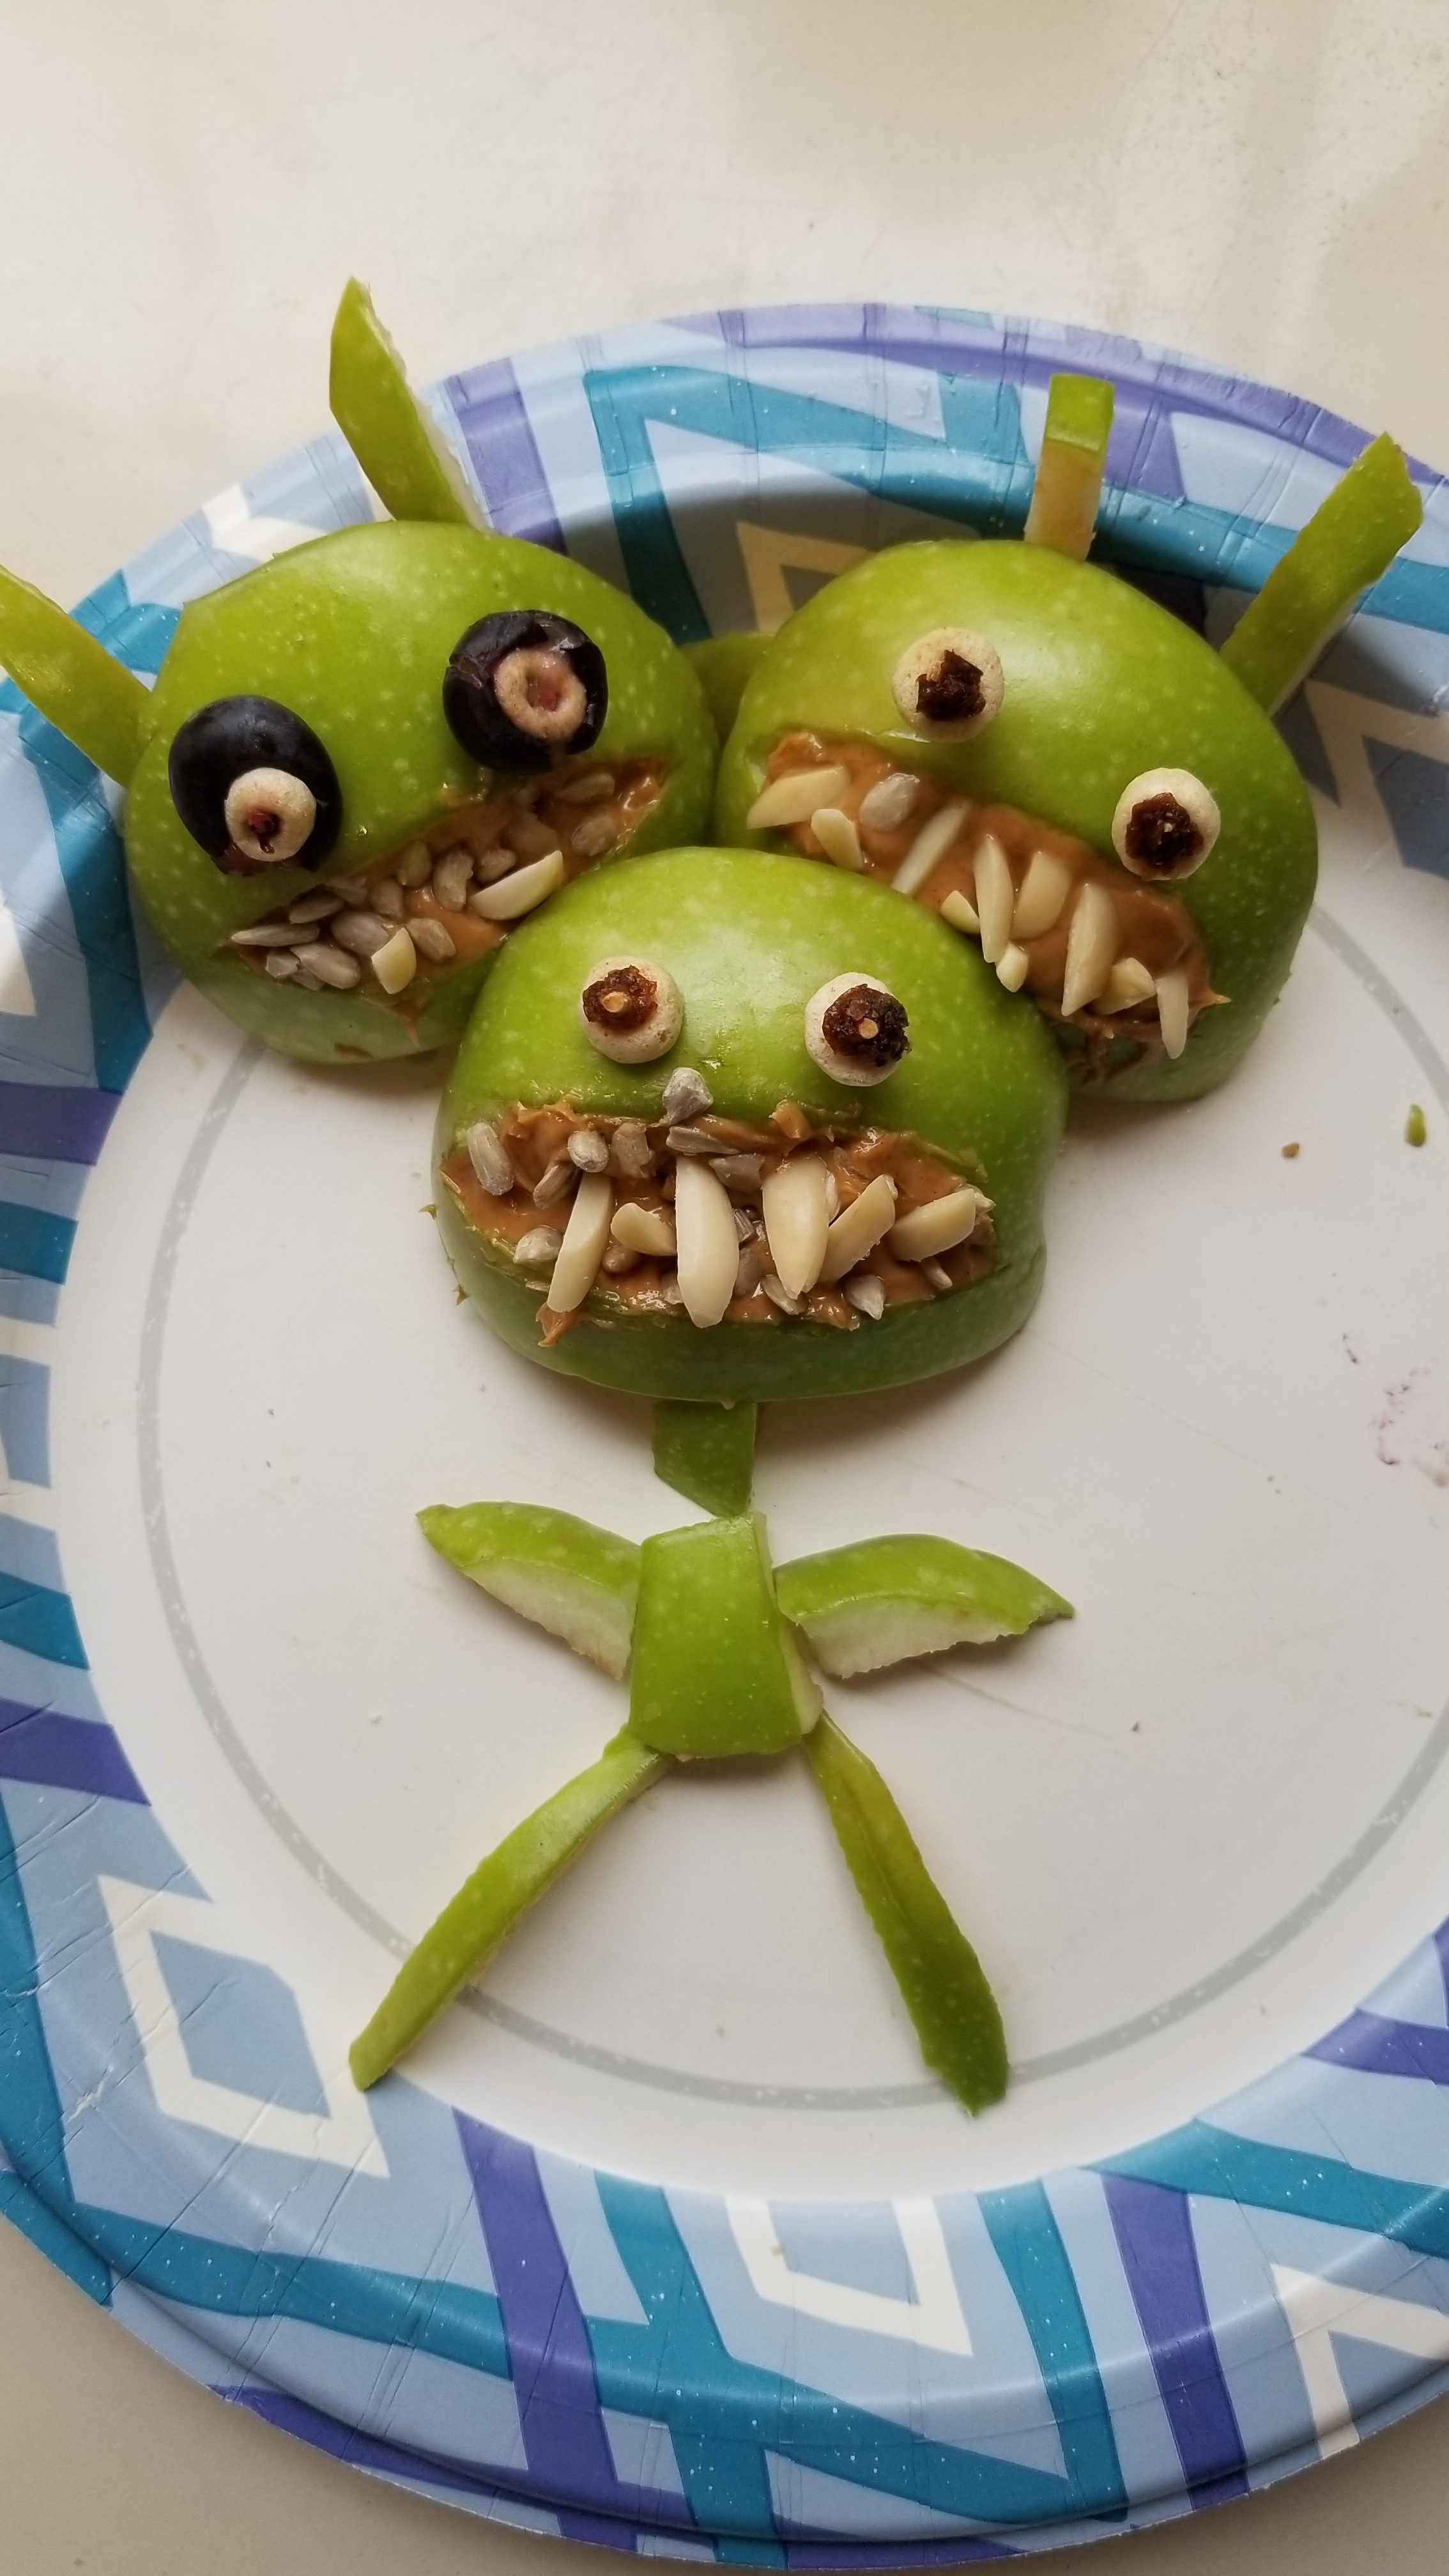 healthy healthy green apples made with peanut butter, Sunflower seeds.